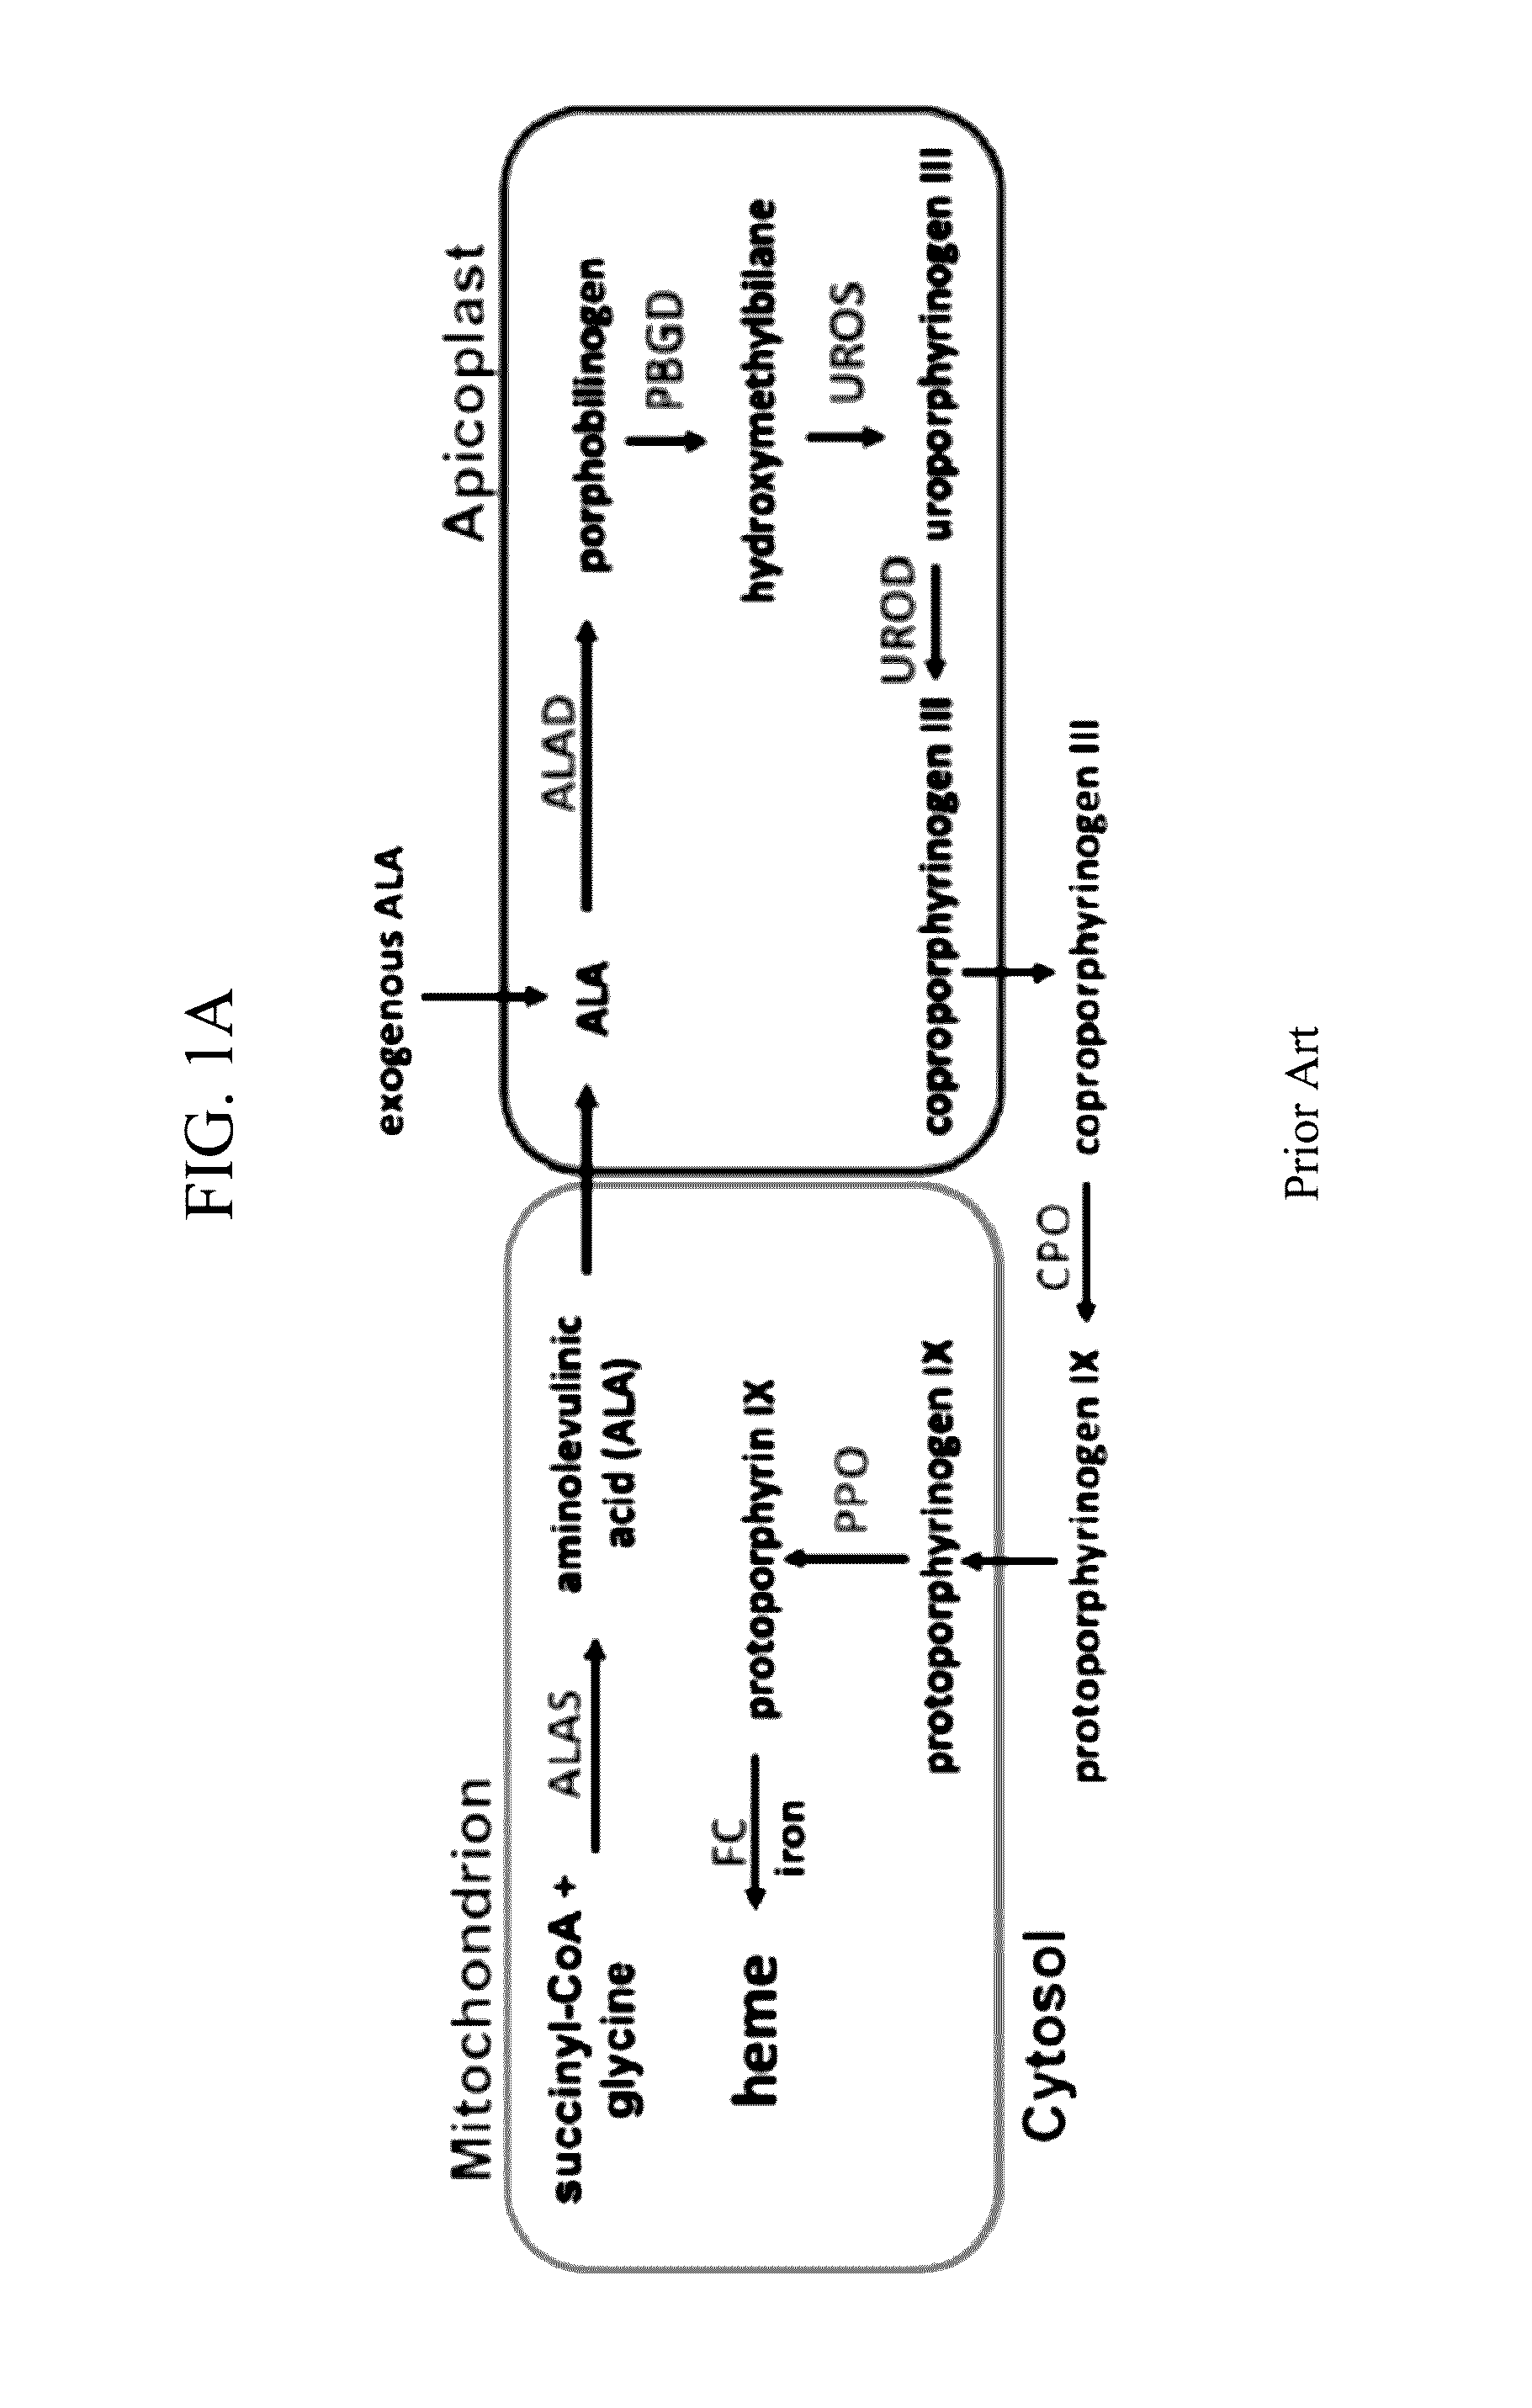 Combination artemisinin and chemiluminescent photodynamic therapy and uses therefor